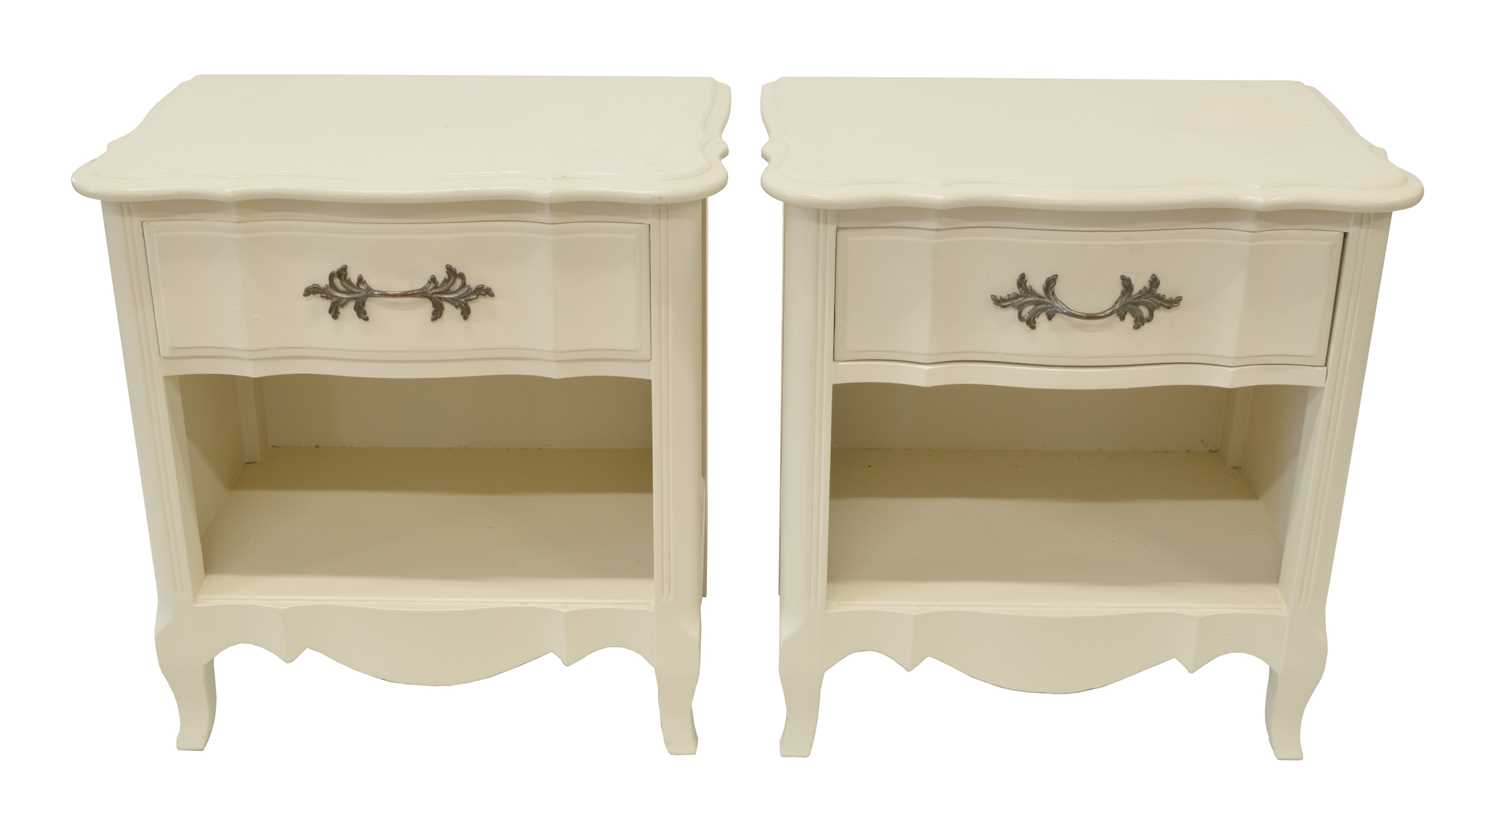 Lot 109 - Pair of Painted Cabinets